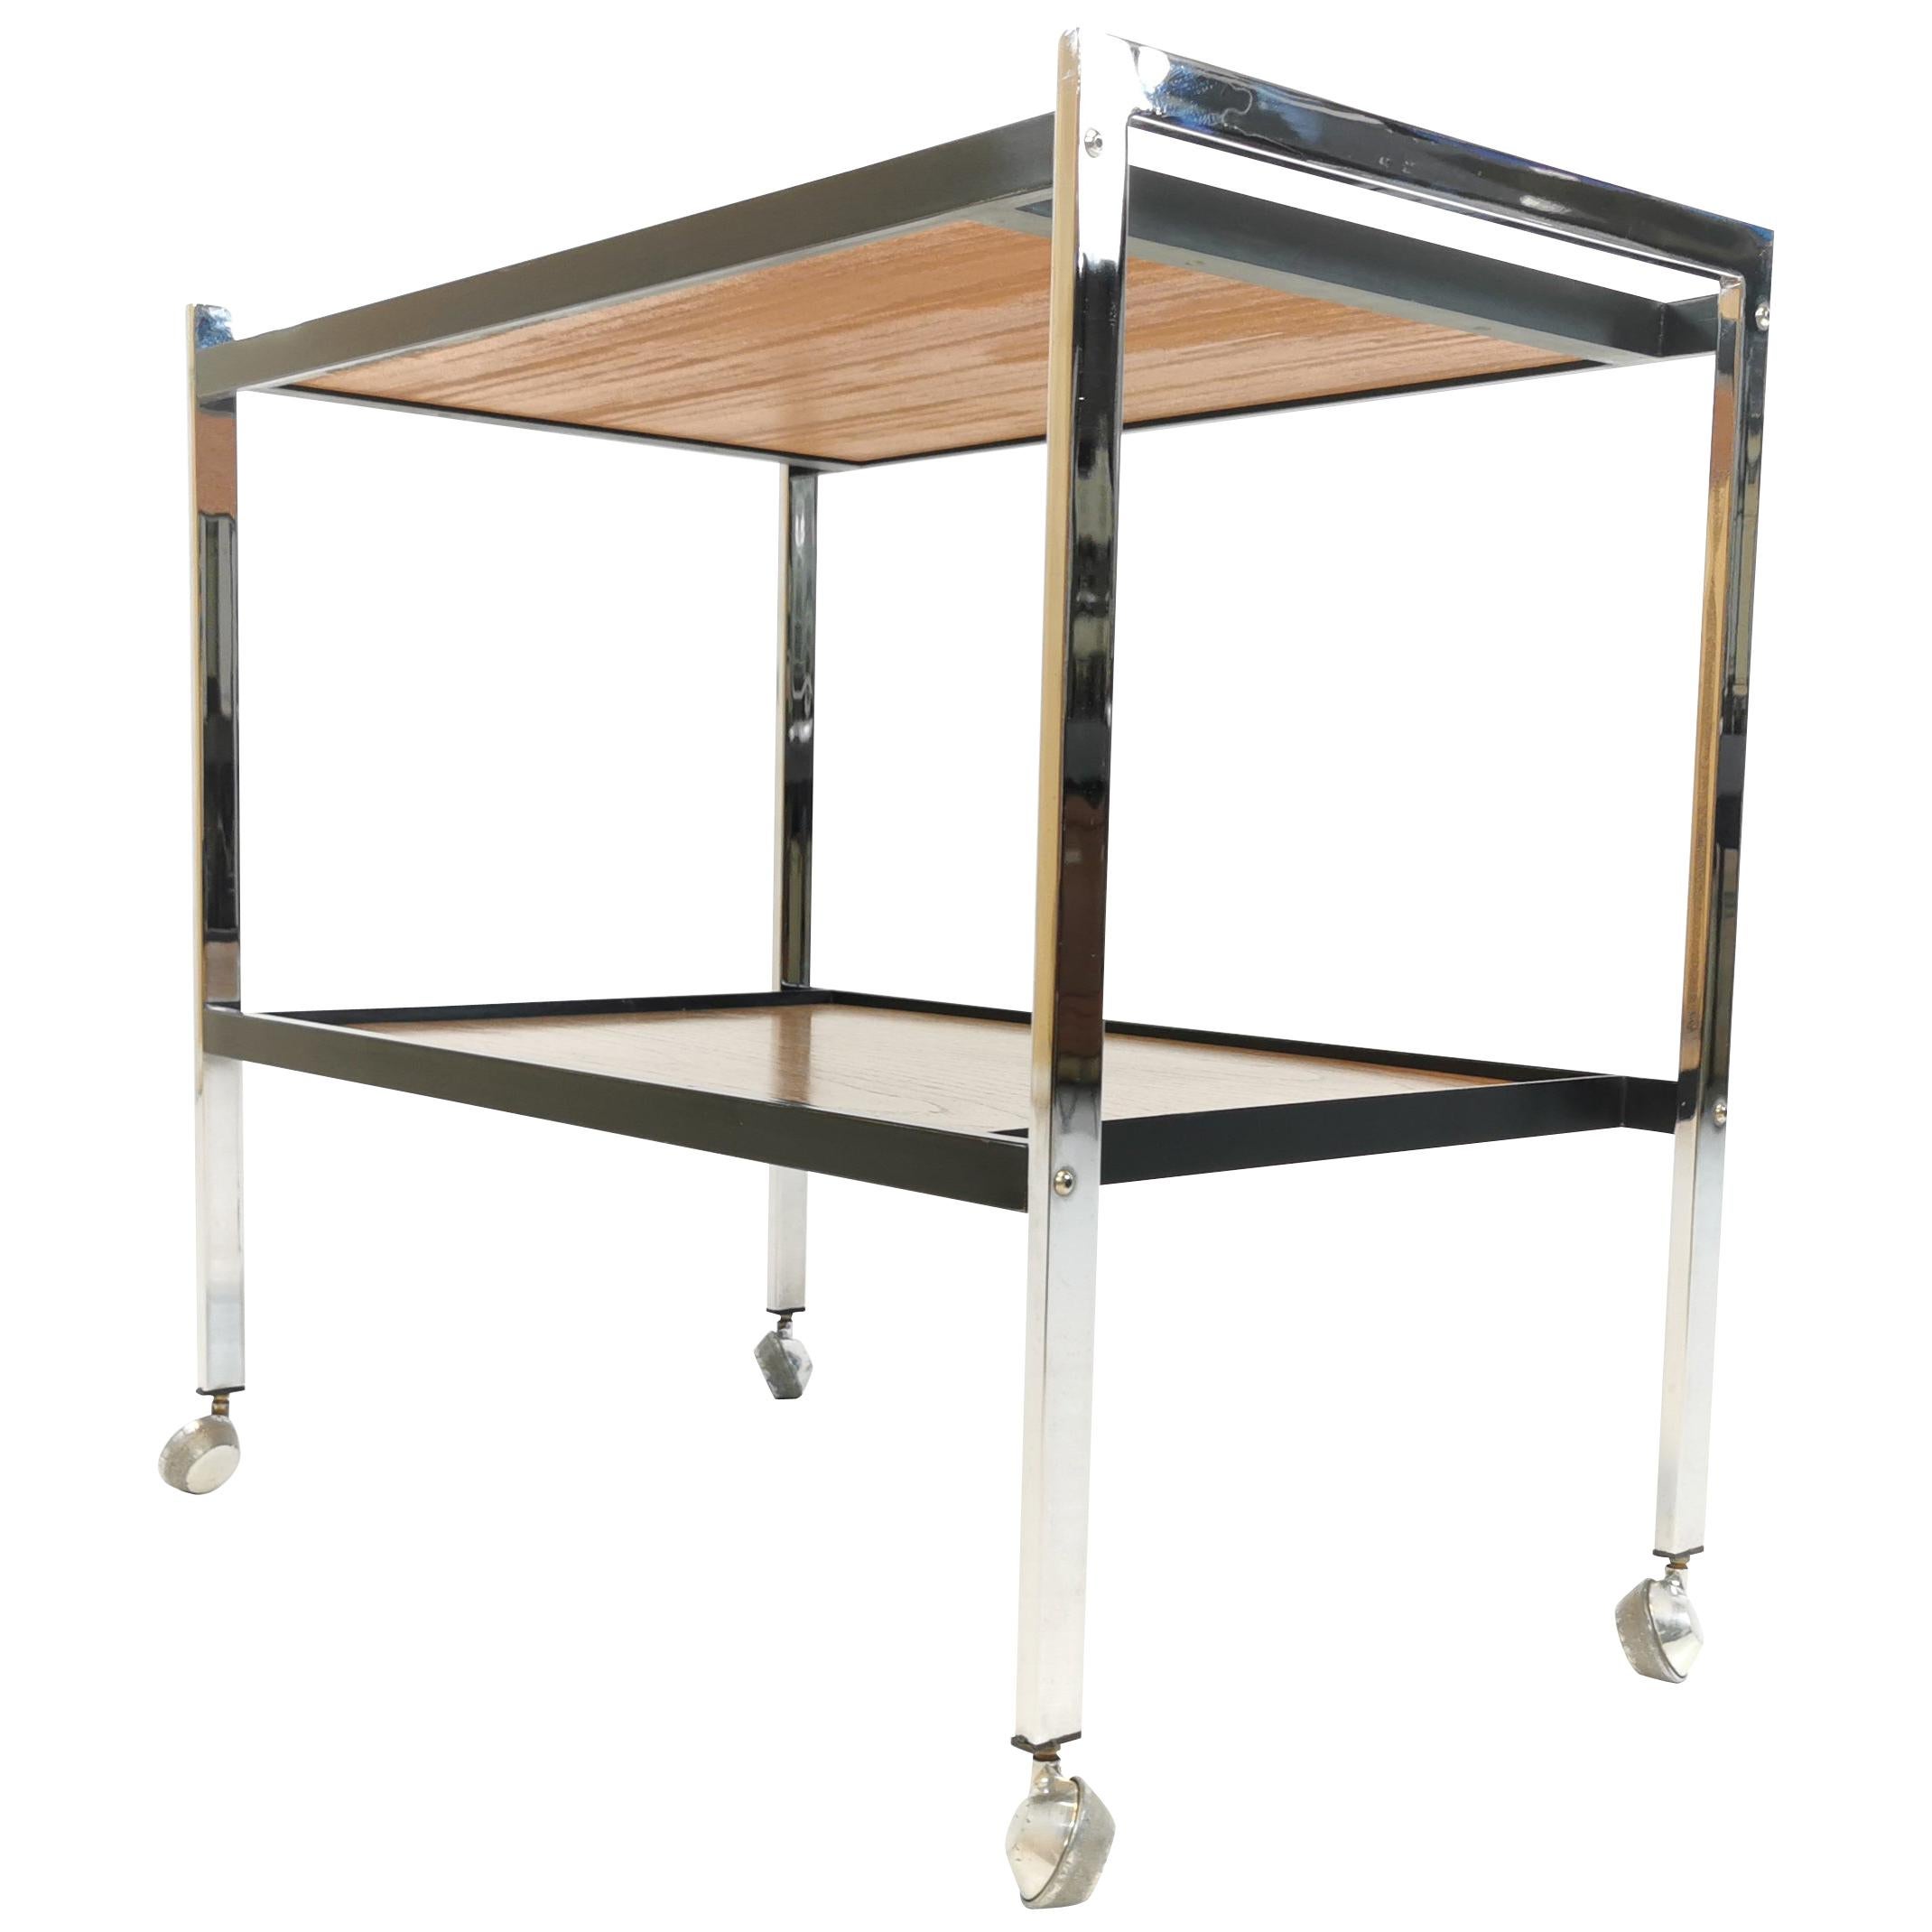 1970s Chrome and Teak Coffee Table Drinks Trolley by Howard Miller